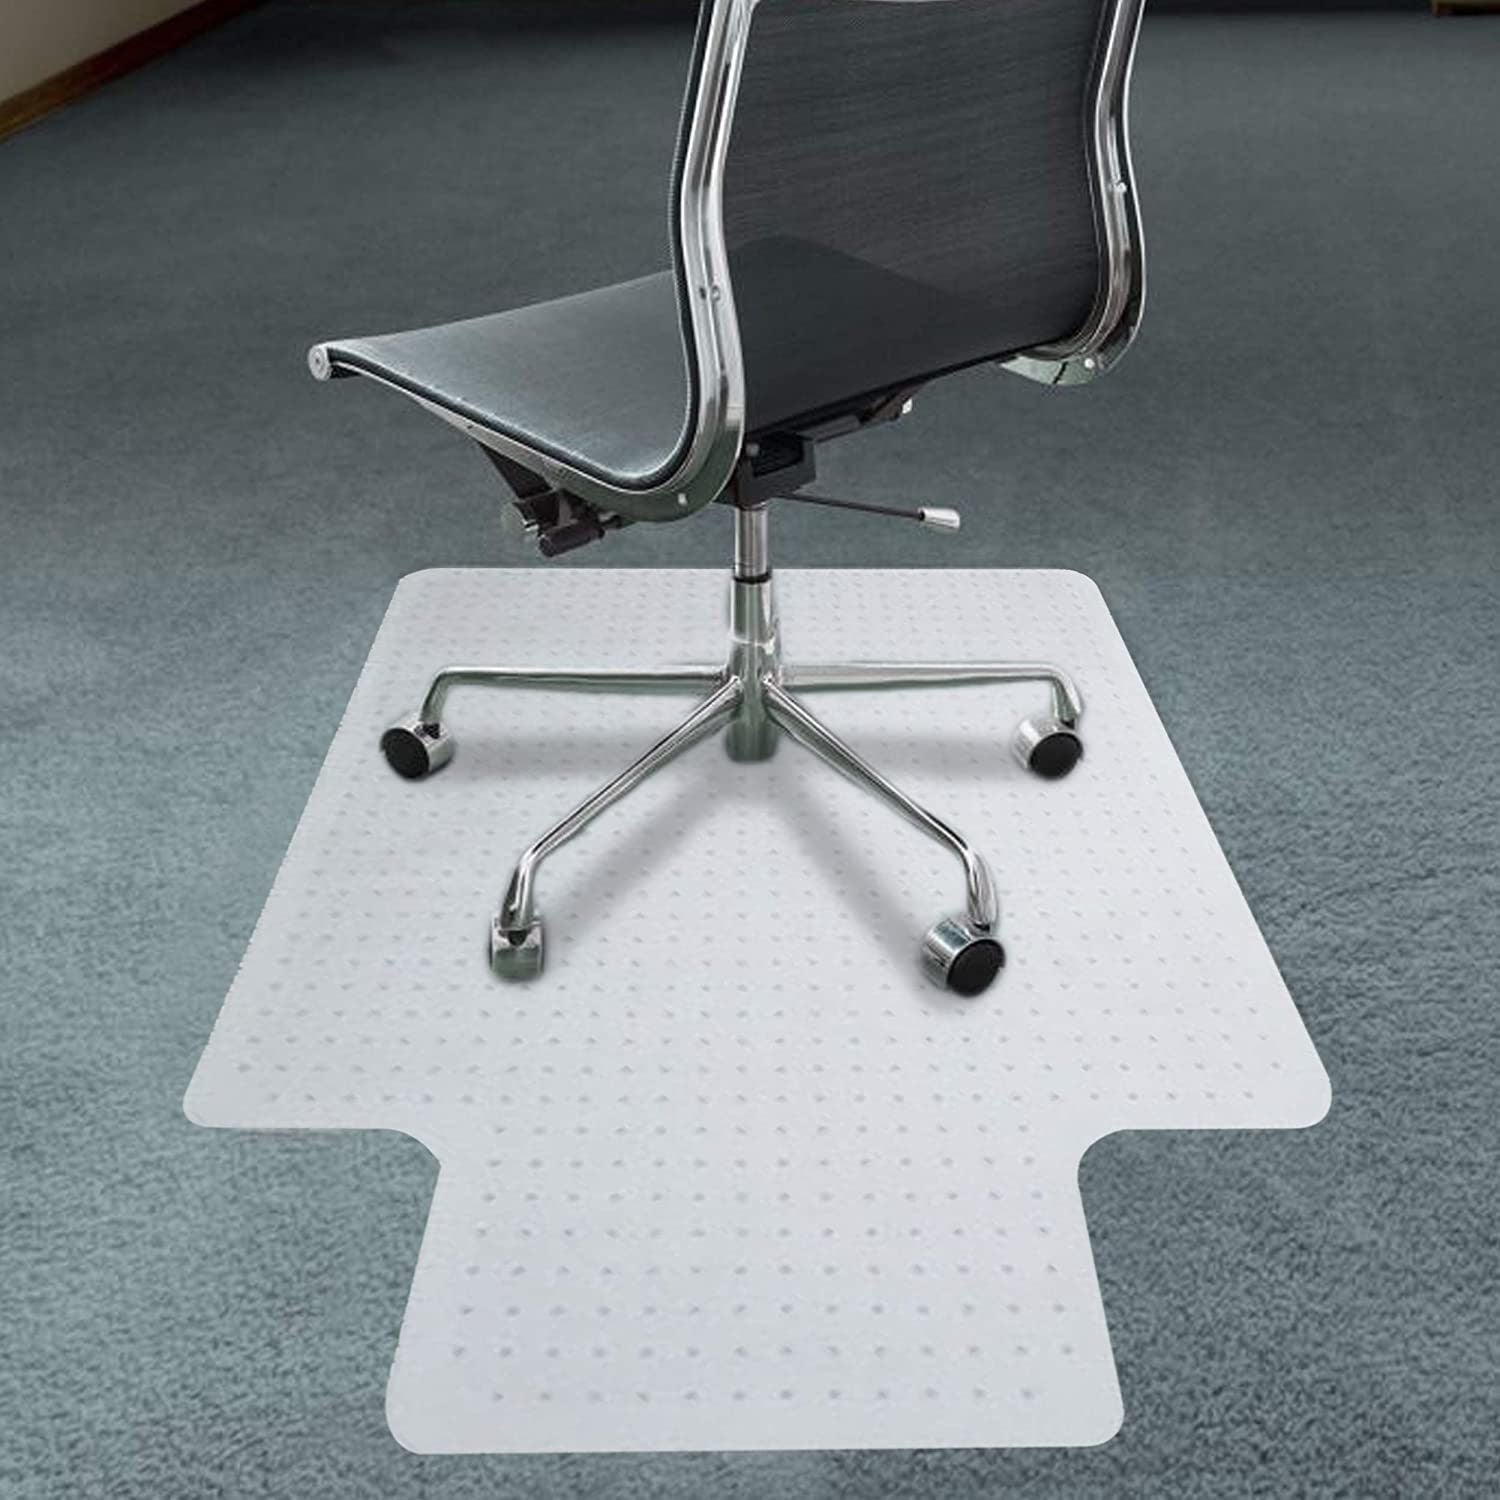 Home Office Chair Mat for Carpet Floor Protection Under Executive Computer Desk